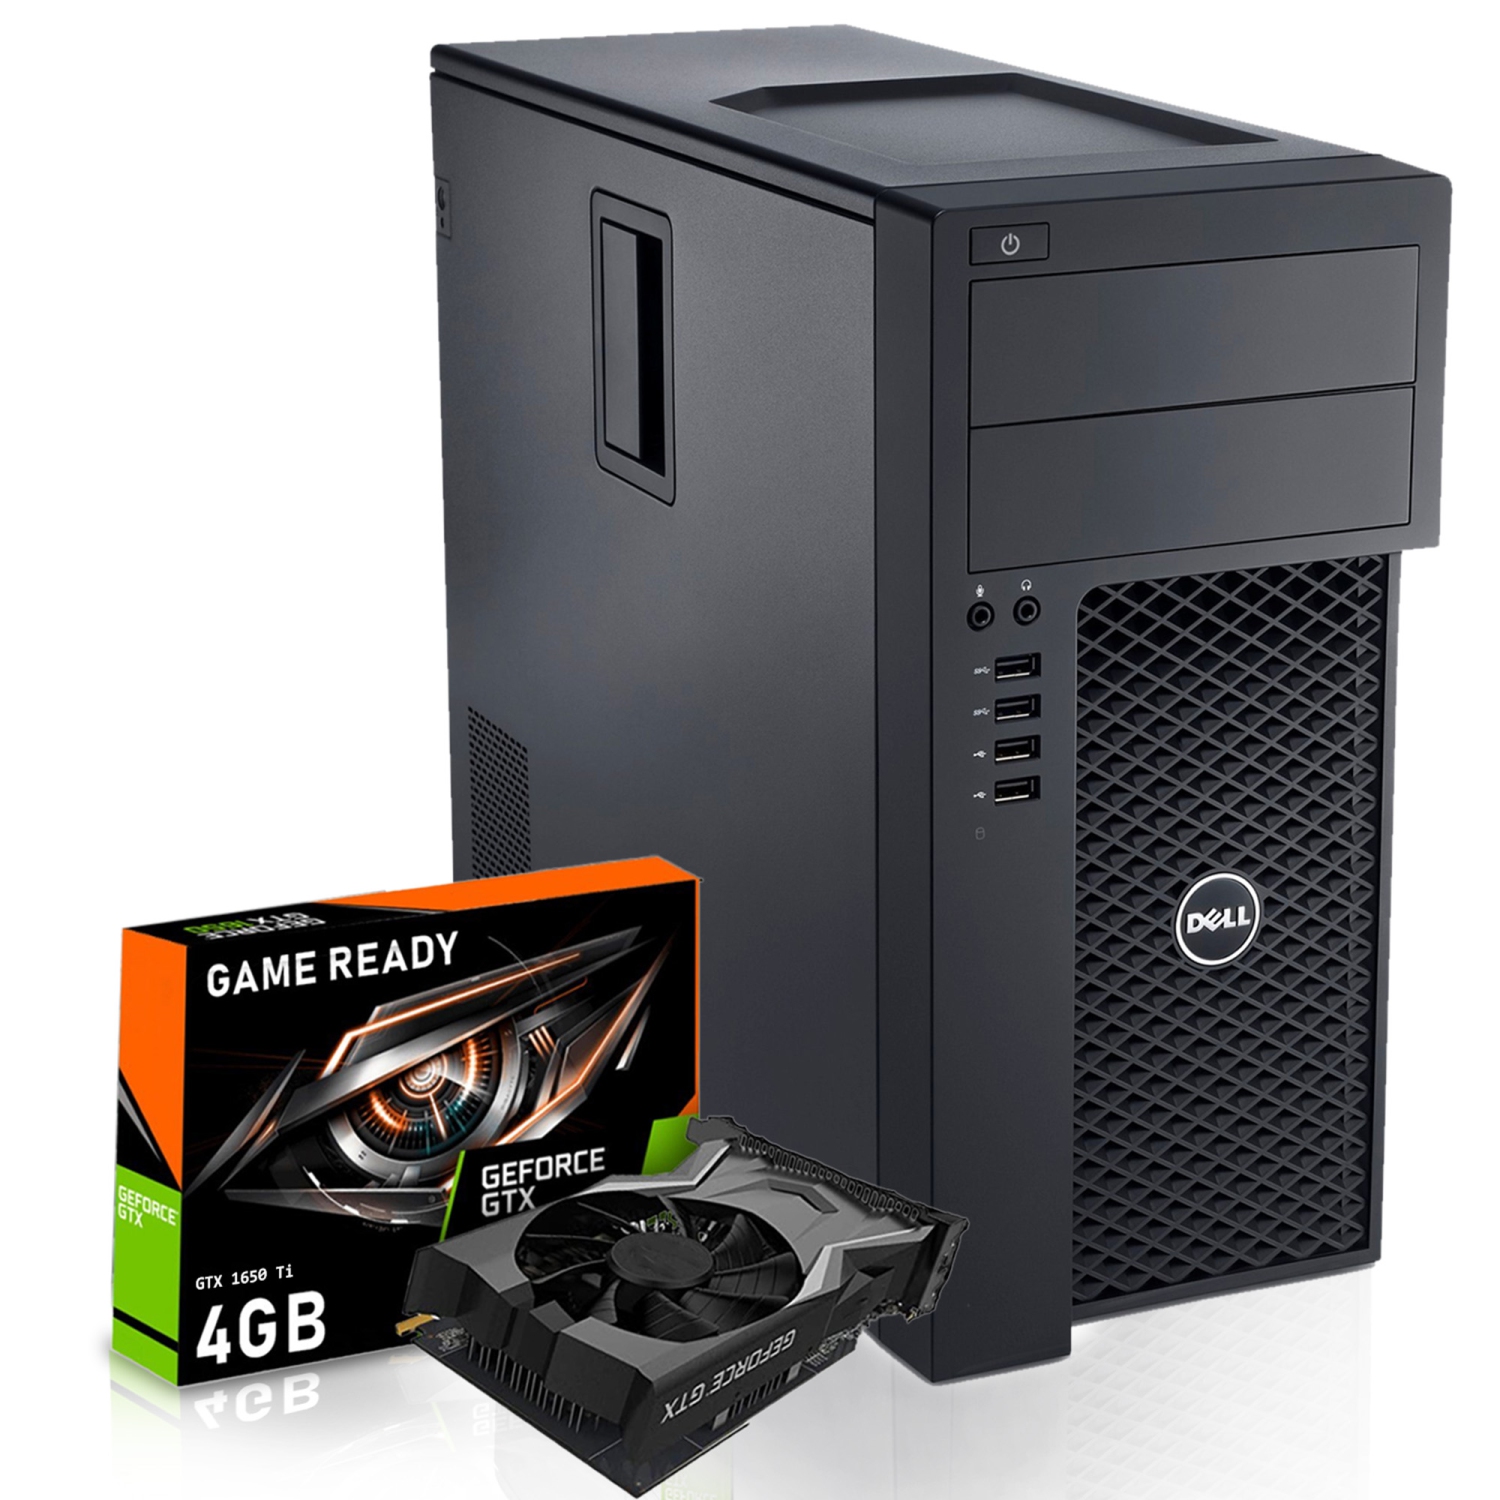 Gaming PC Dell Business Tower | 1TB SSD | 32GB DDR4 Memory | Intel Core i7 6700 | DDR5 NVIDIA GTX 1650 | Win 10 Pro | Gaming Keyboard & Mouse | HDMI | WiFi - Refurbished (Good)